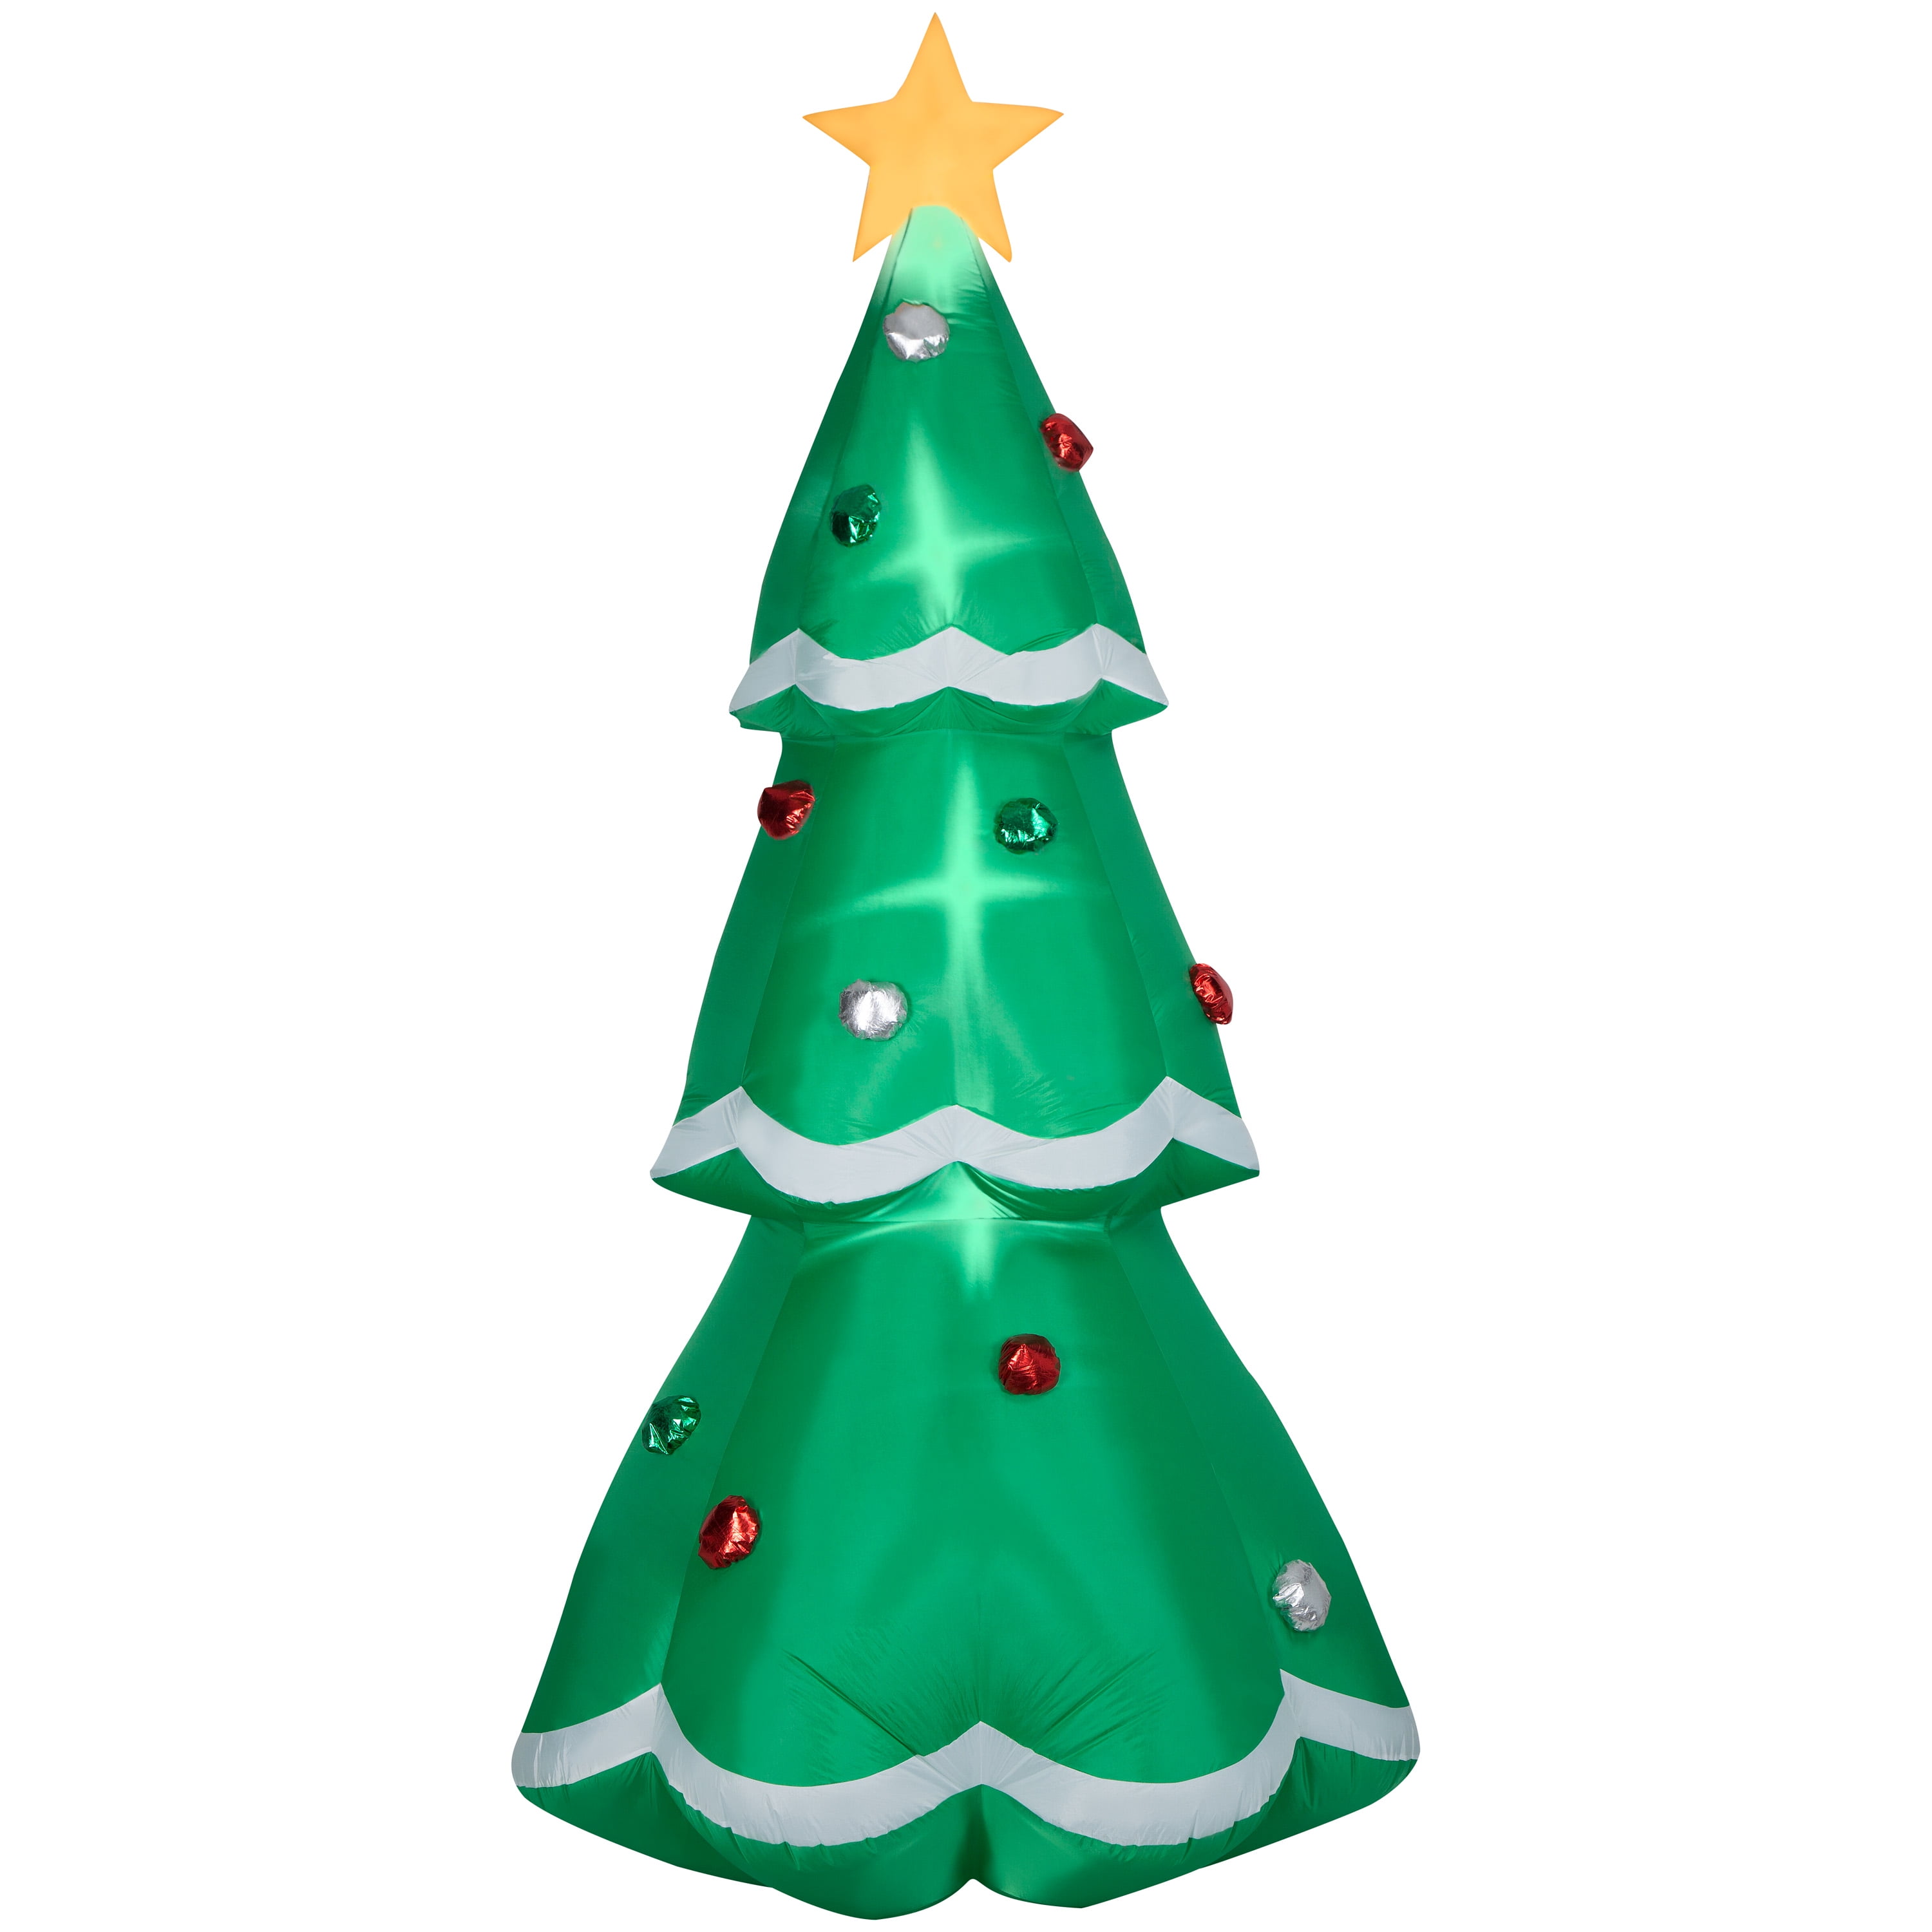 Holiday Time 10 Foot Tall Christmas Tree with Metallic Ornaments